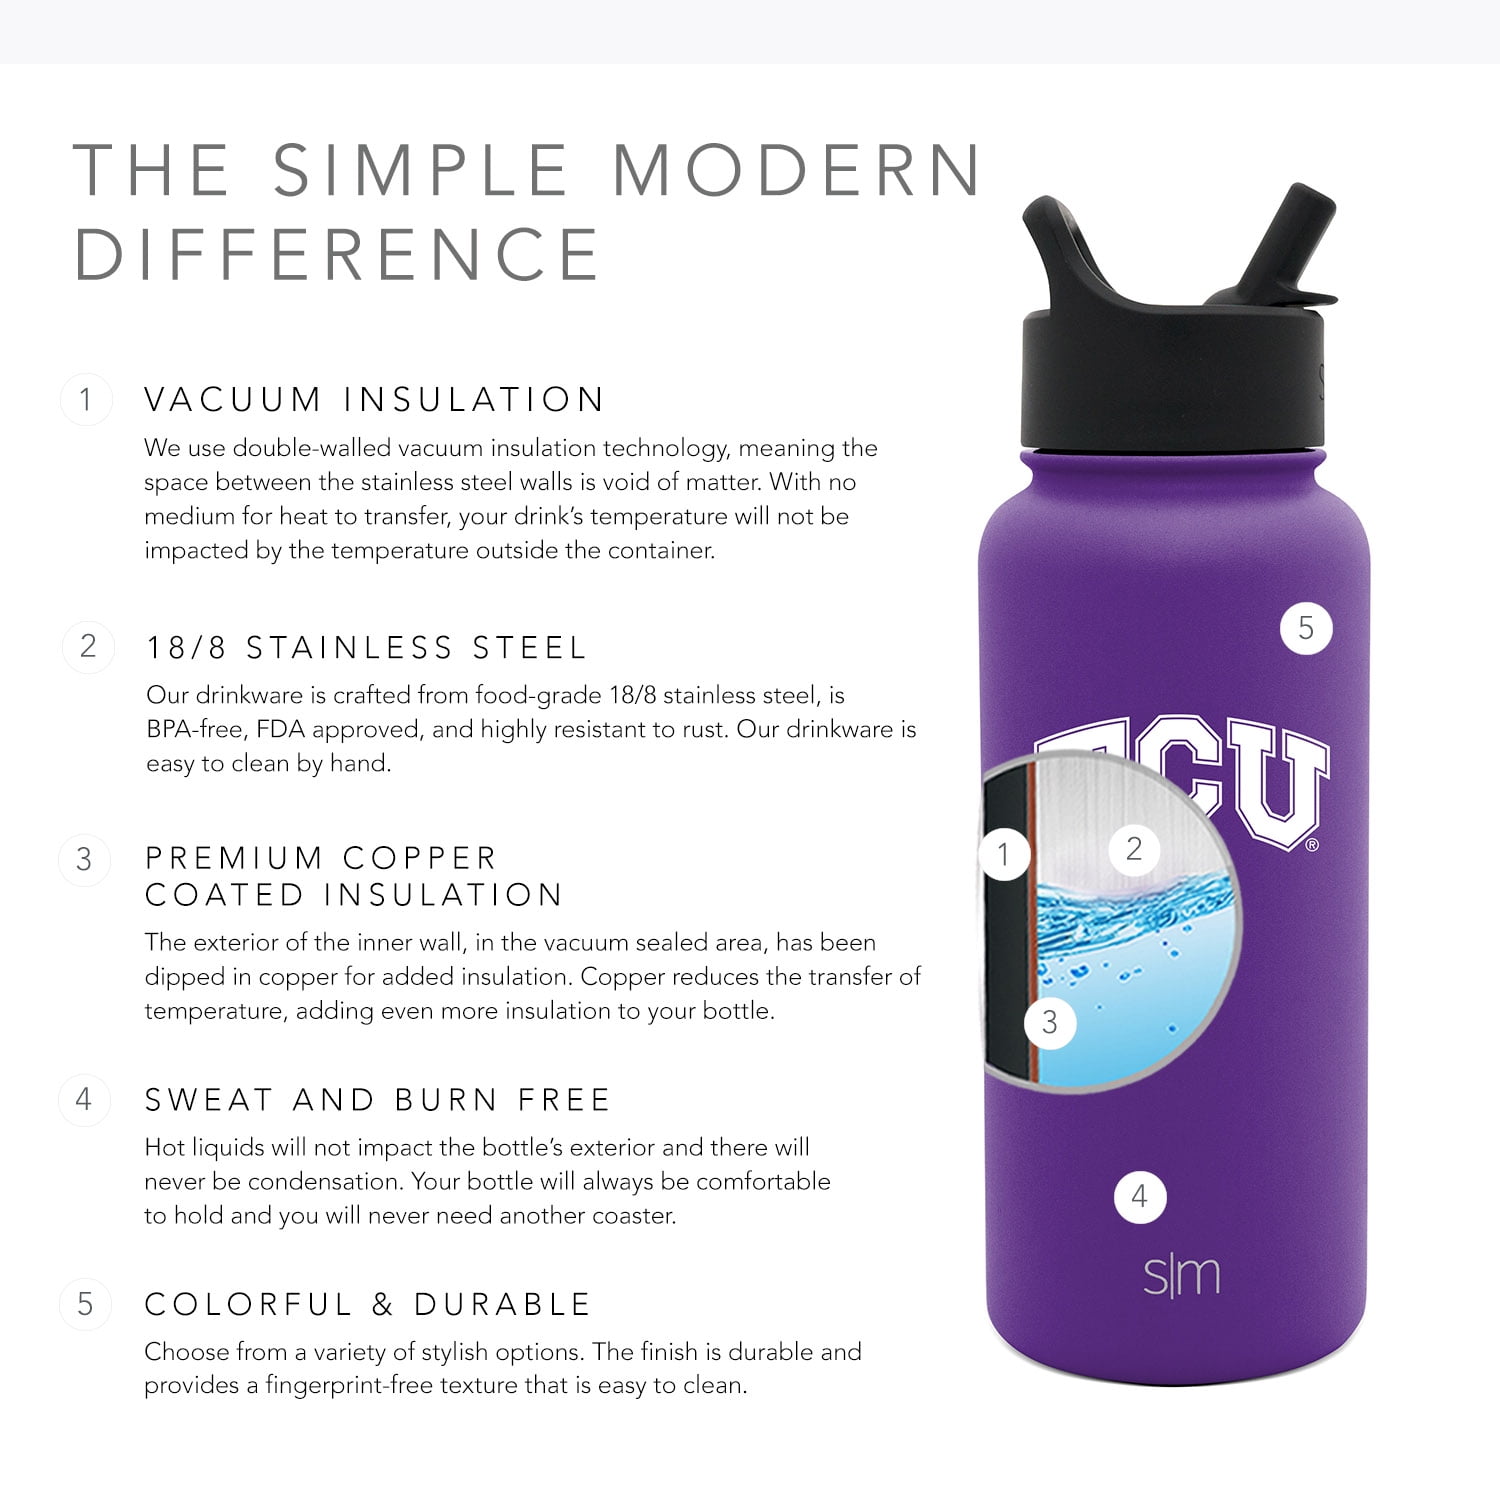 Prodigy Insulated Water Bottle - Will Schusterick Logo 12 oz.